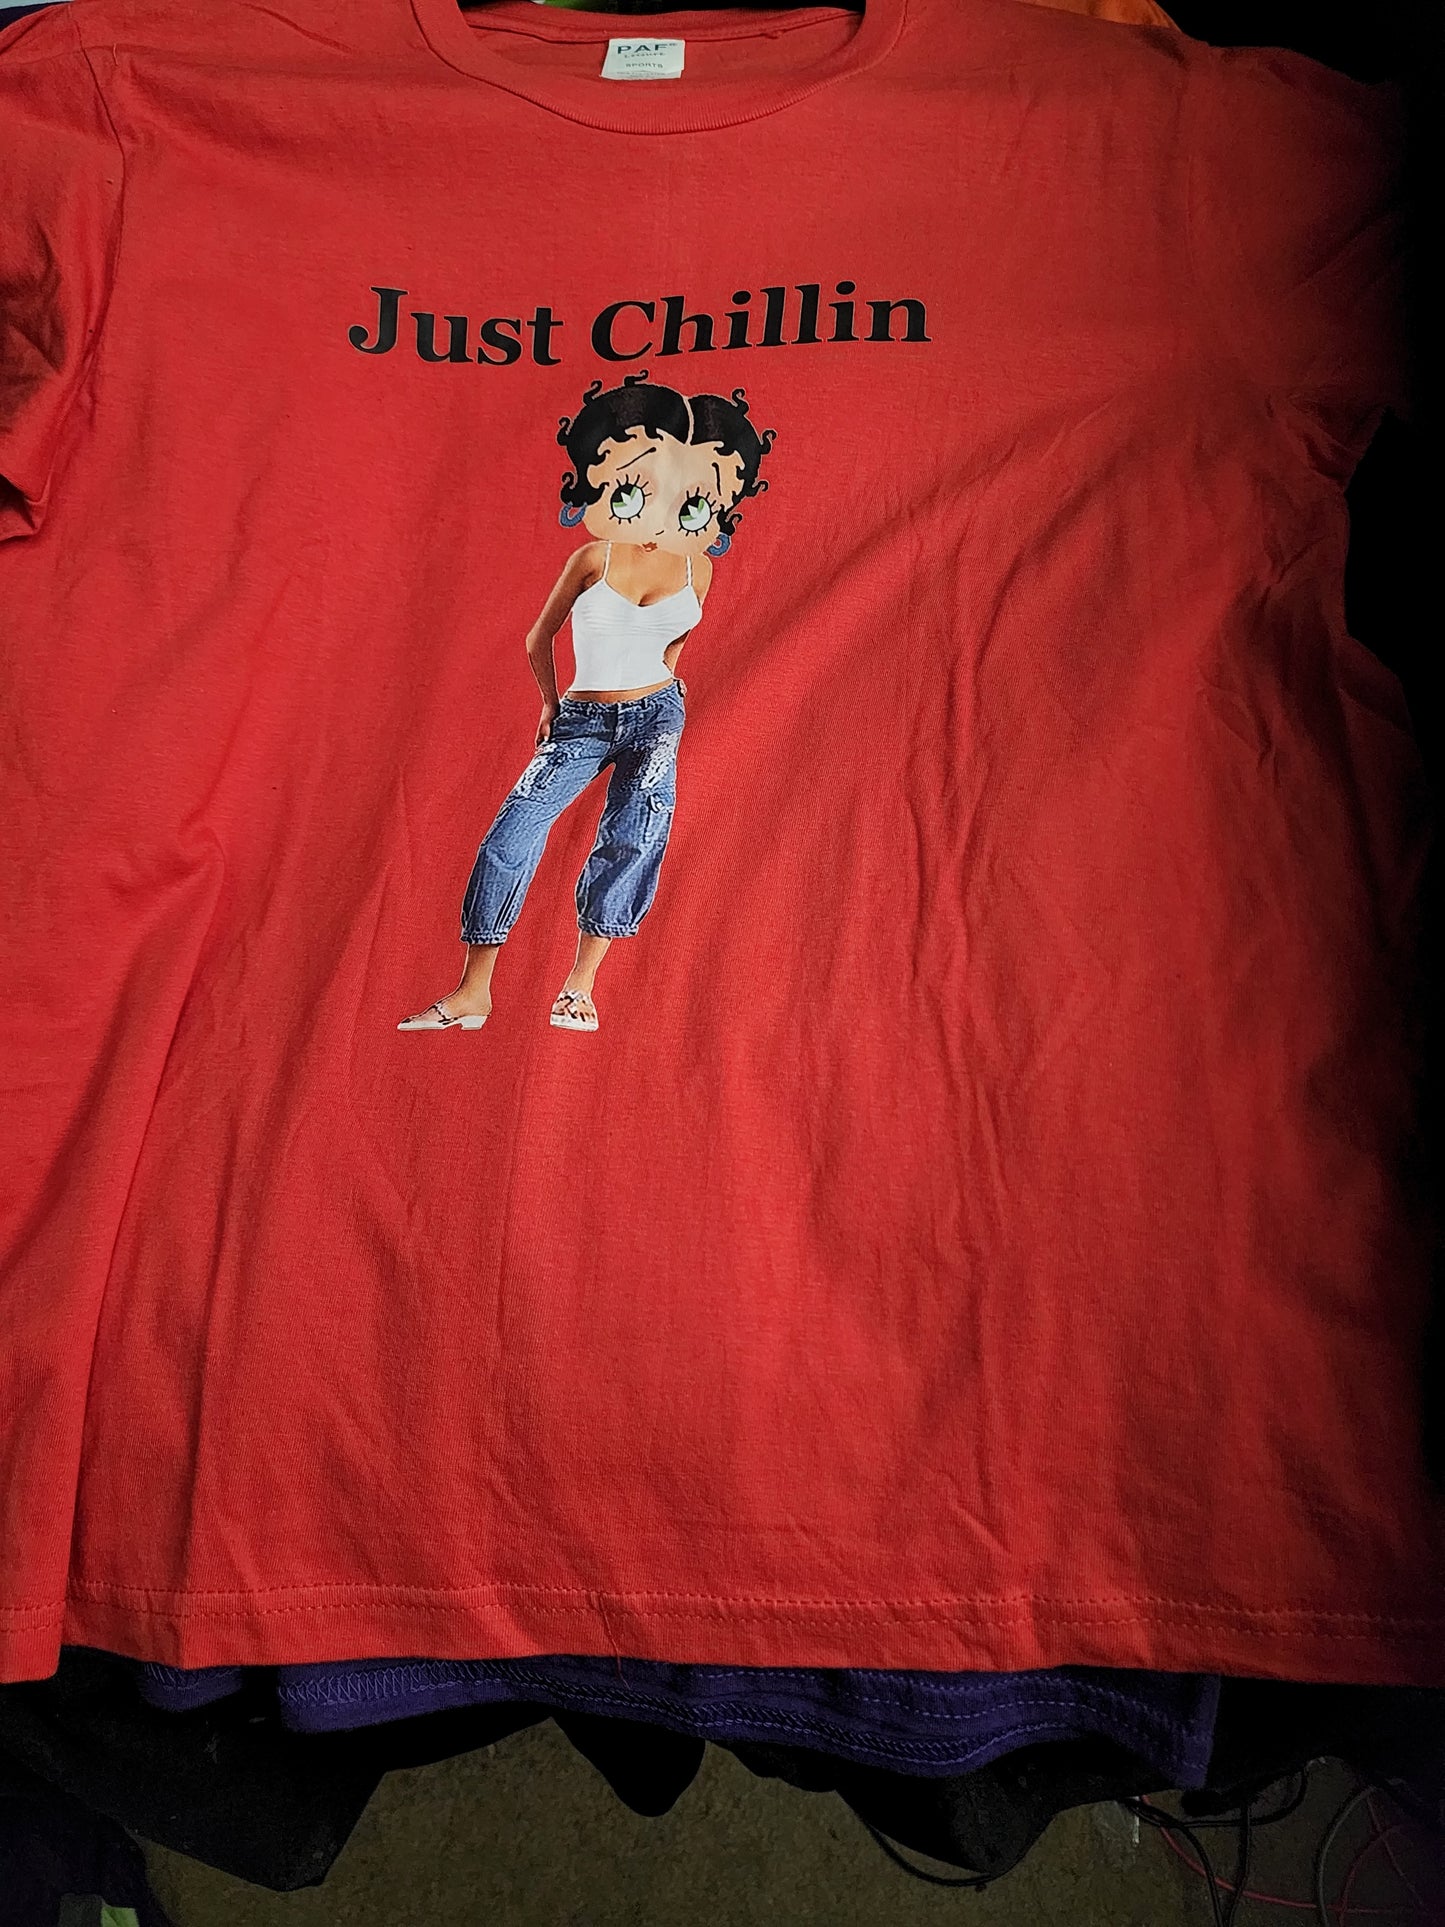 "Just Chillin" T-shirt, shorts, and sandal collection